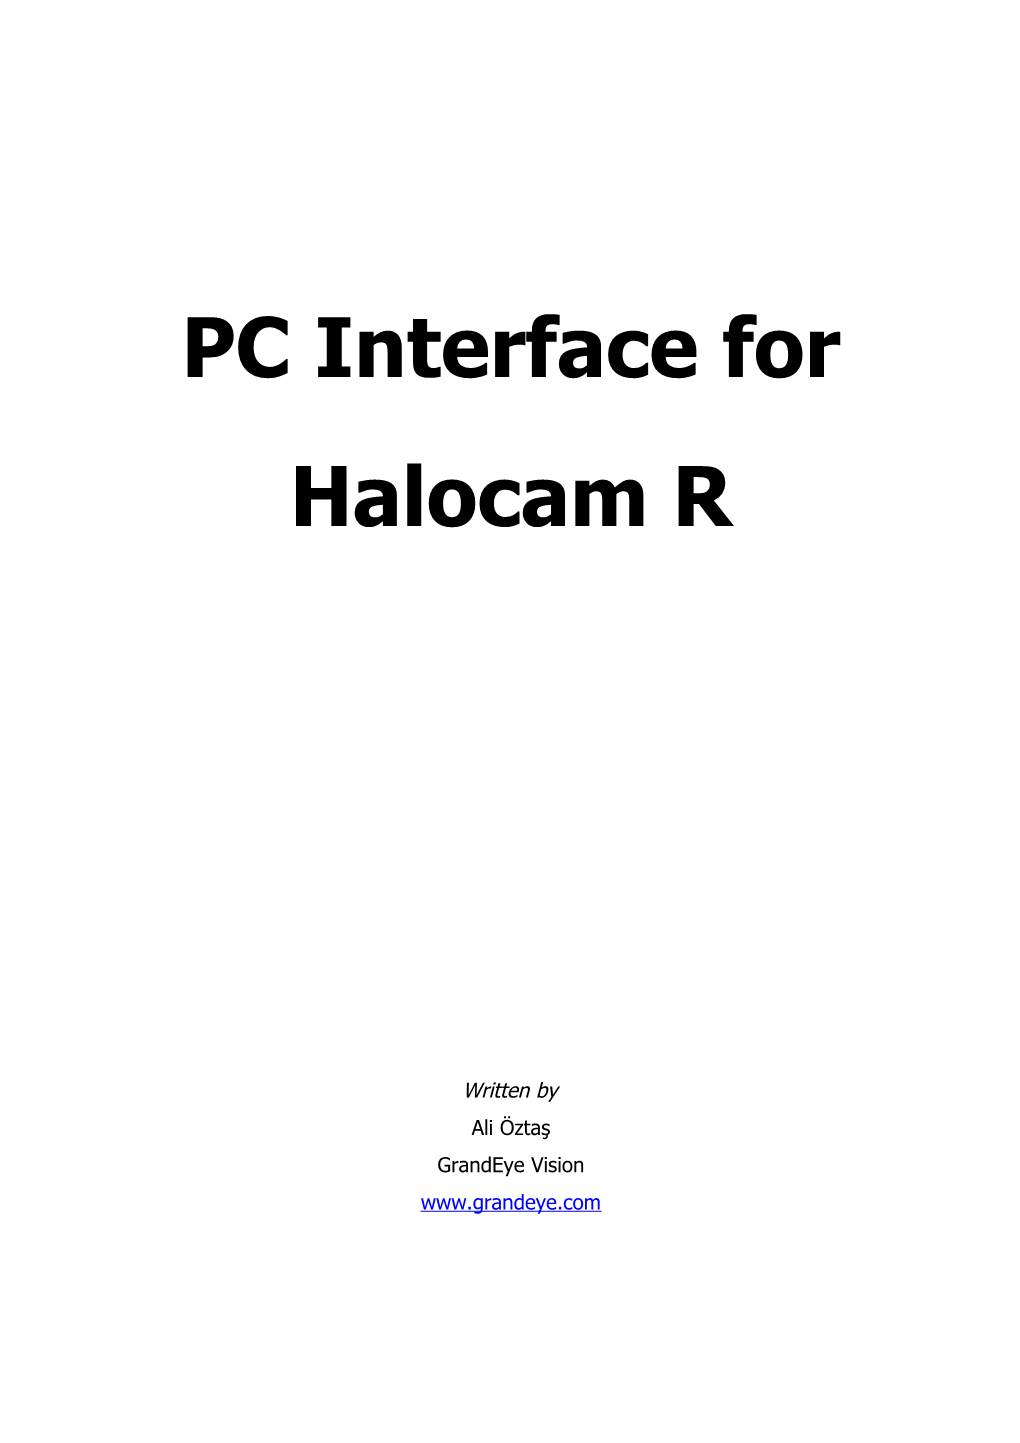 PC Interface for Halocam R